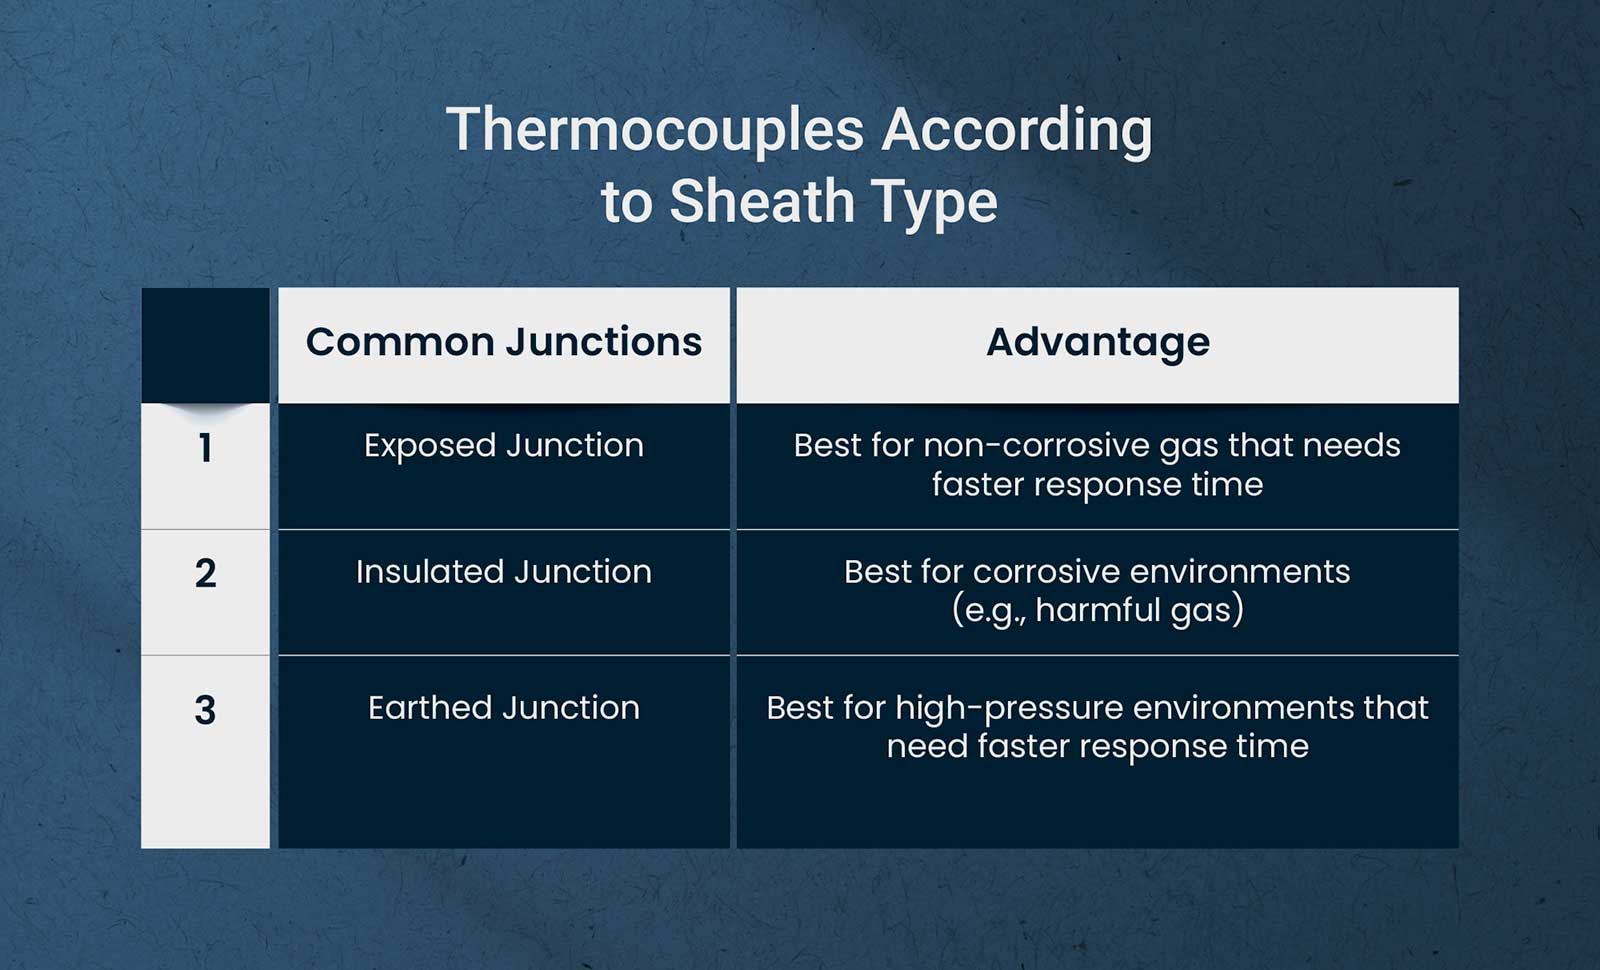 Table B: Thermocouples according to Sheath Type